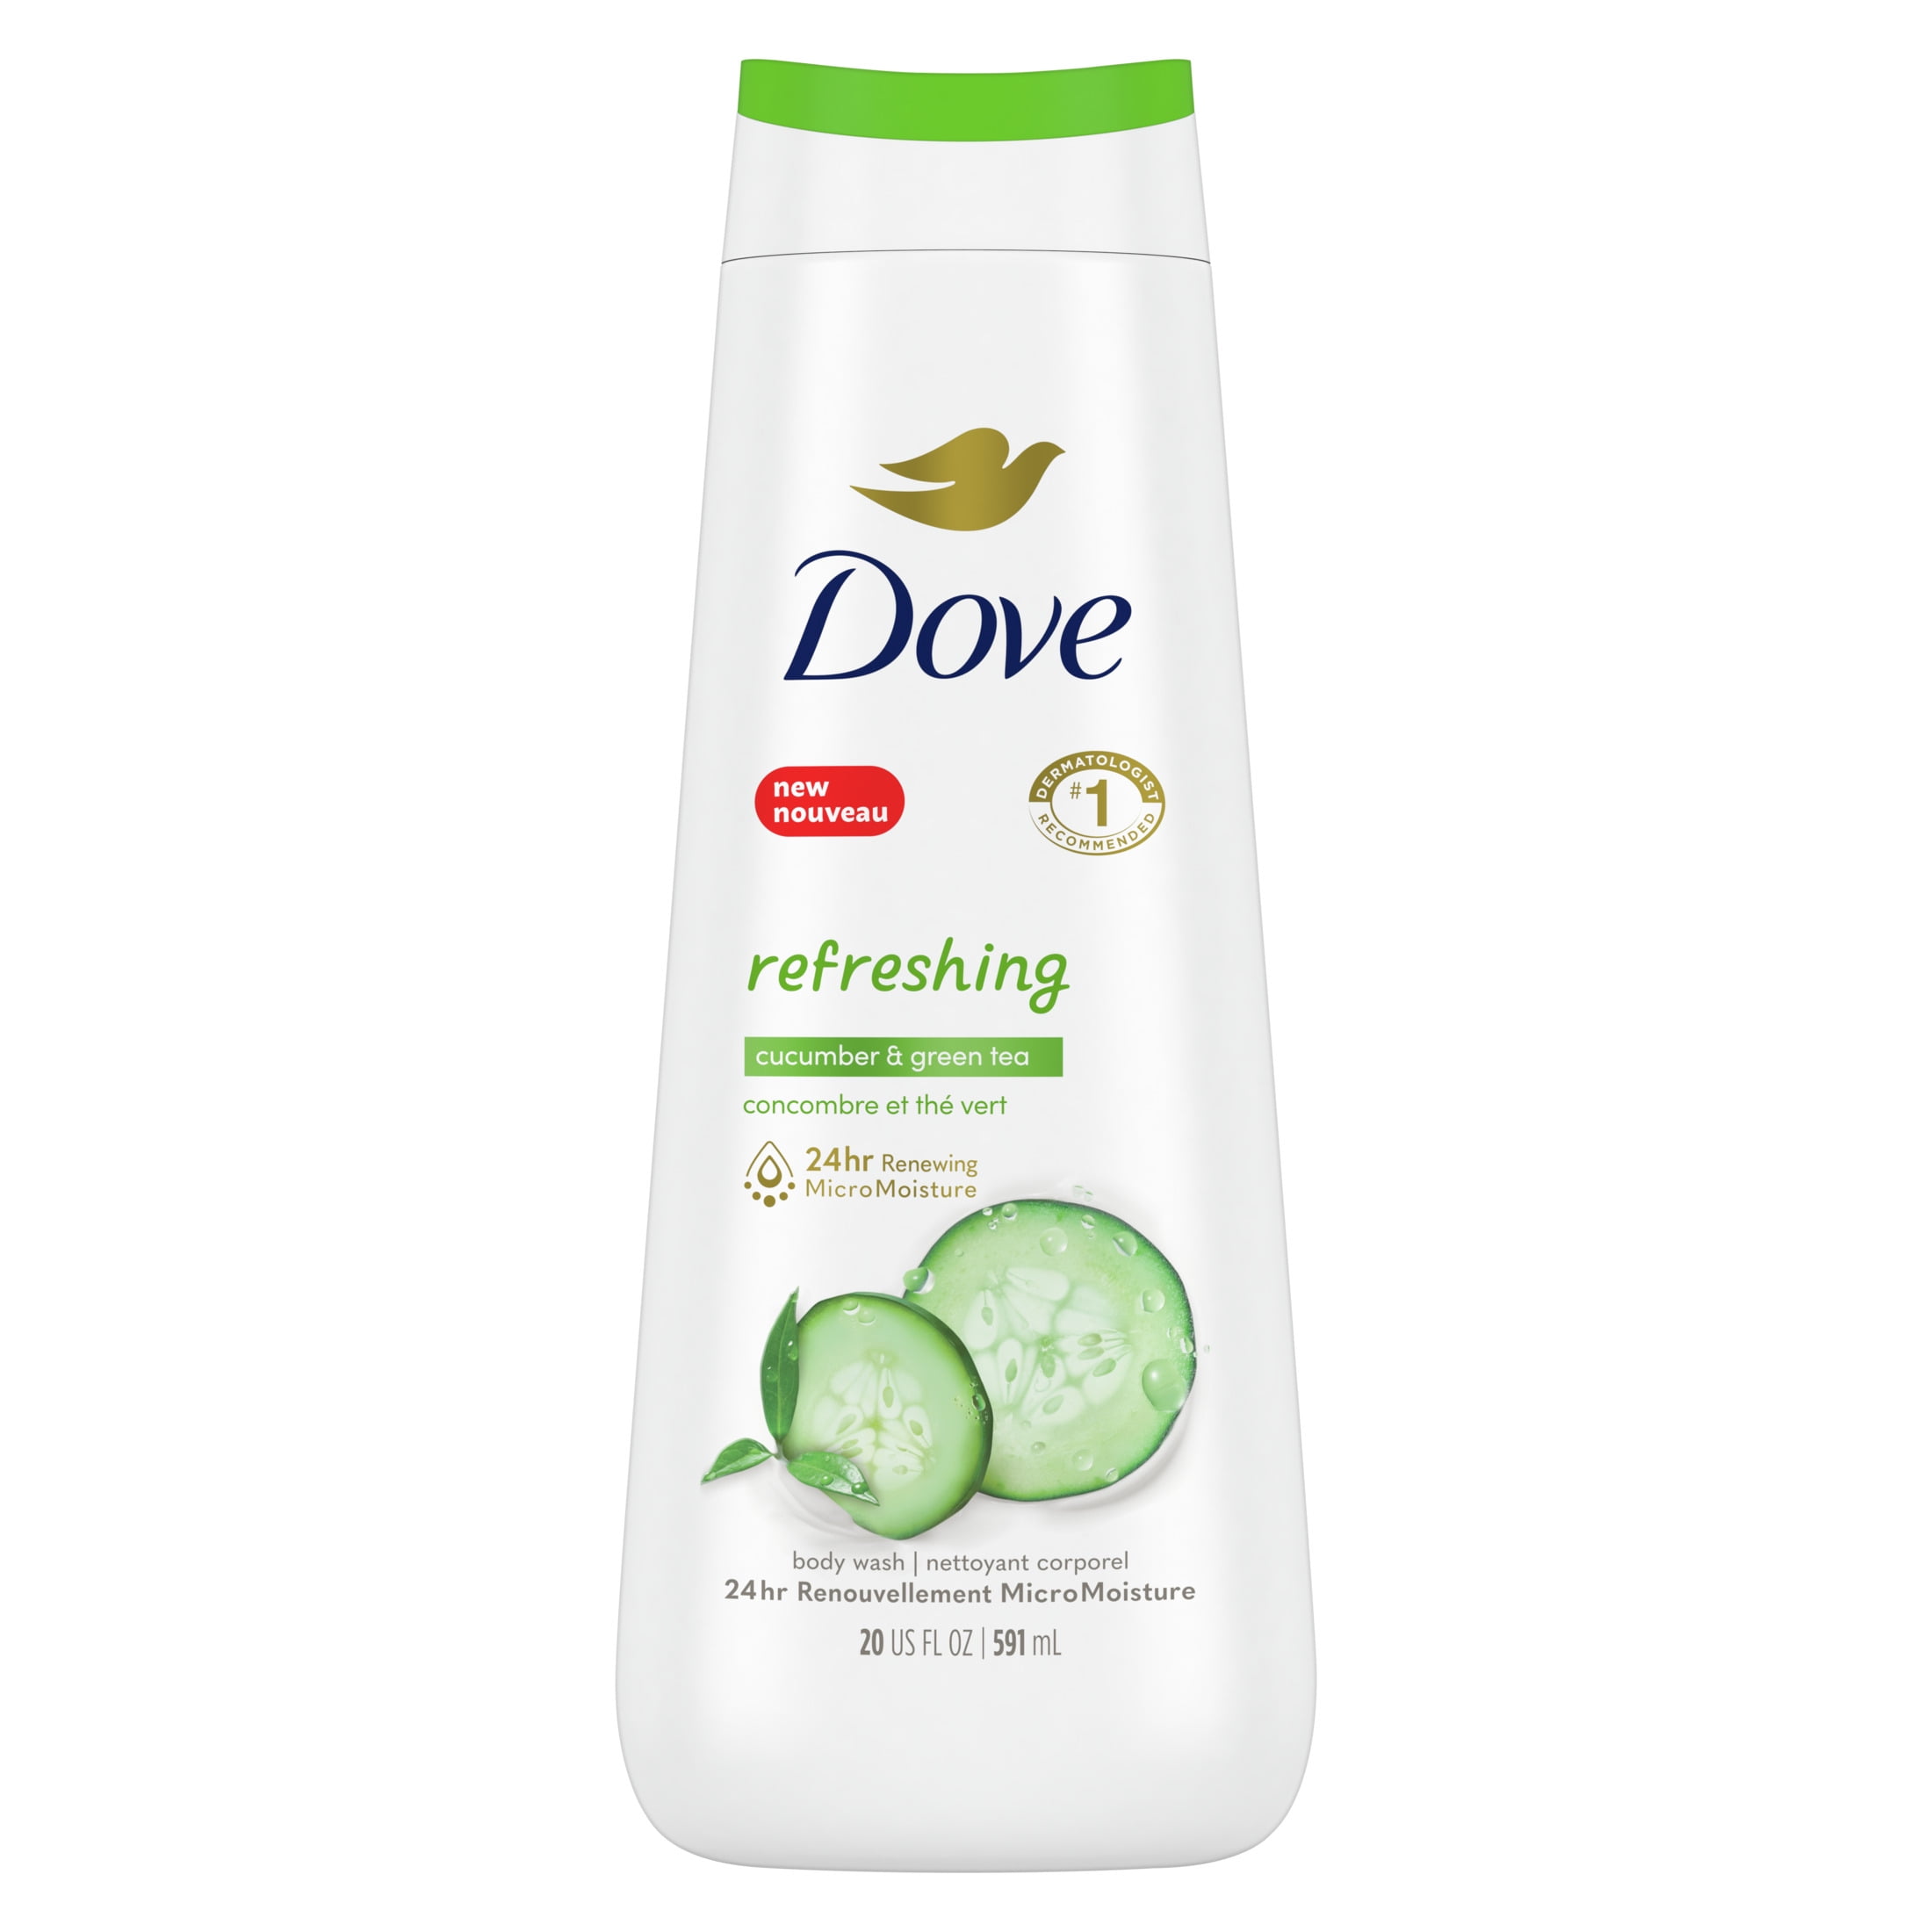 Dove Refreshing Body Wash Cucumber and Green Tea Cleanser, 20 oz